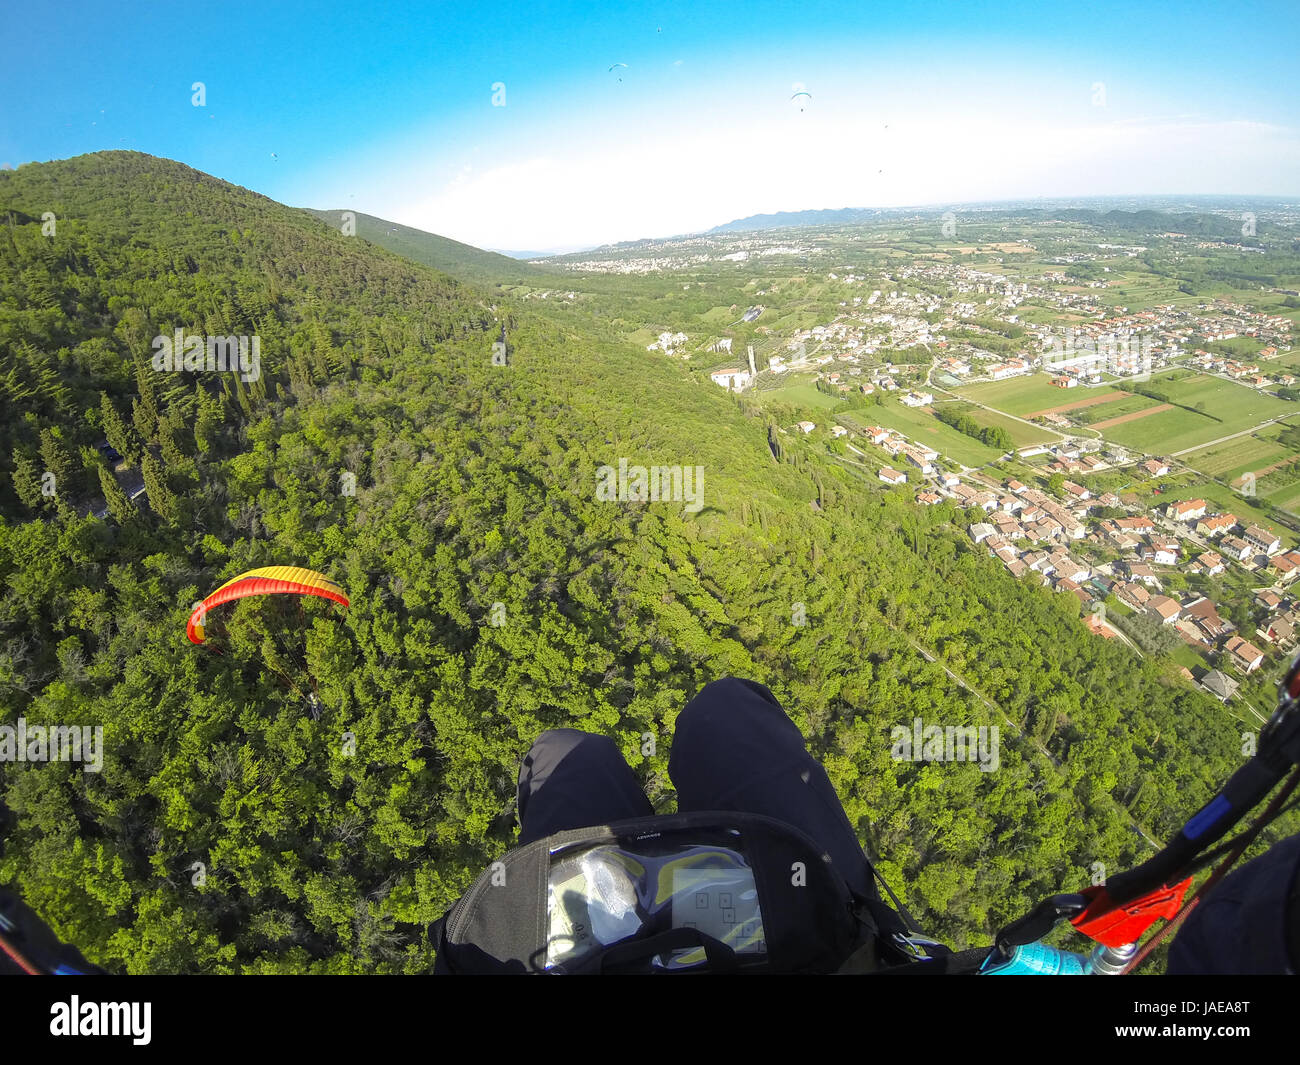 Paragliders taking off from mountain Stock Photo